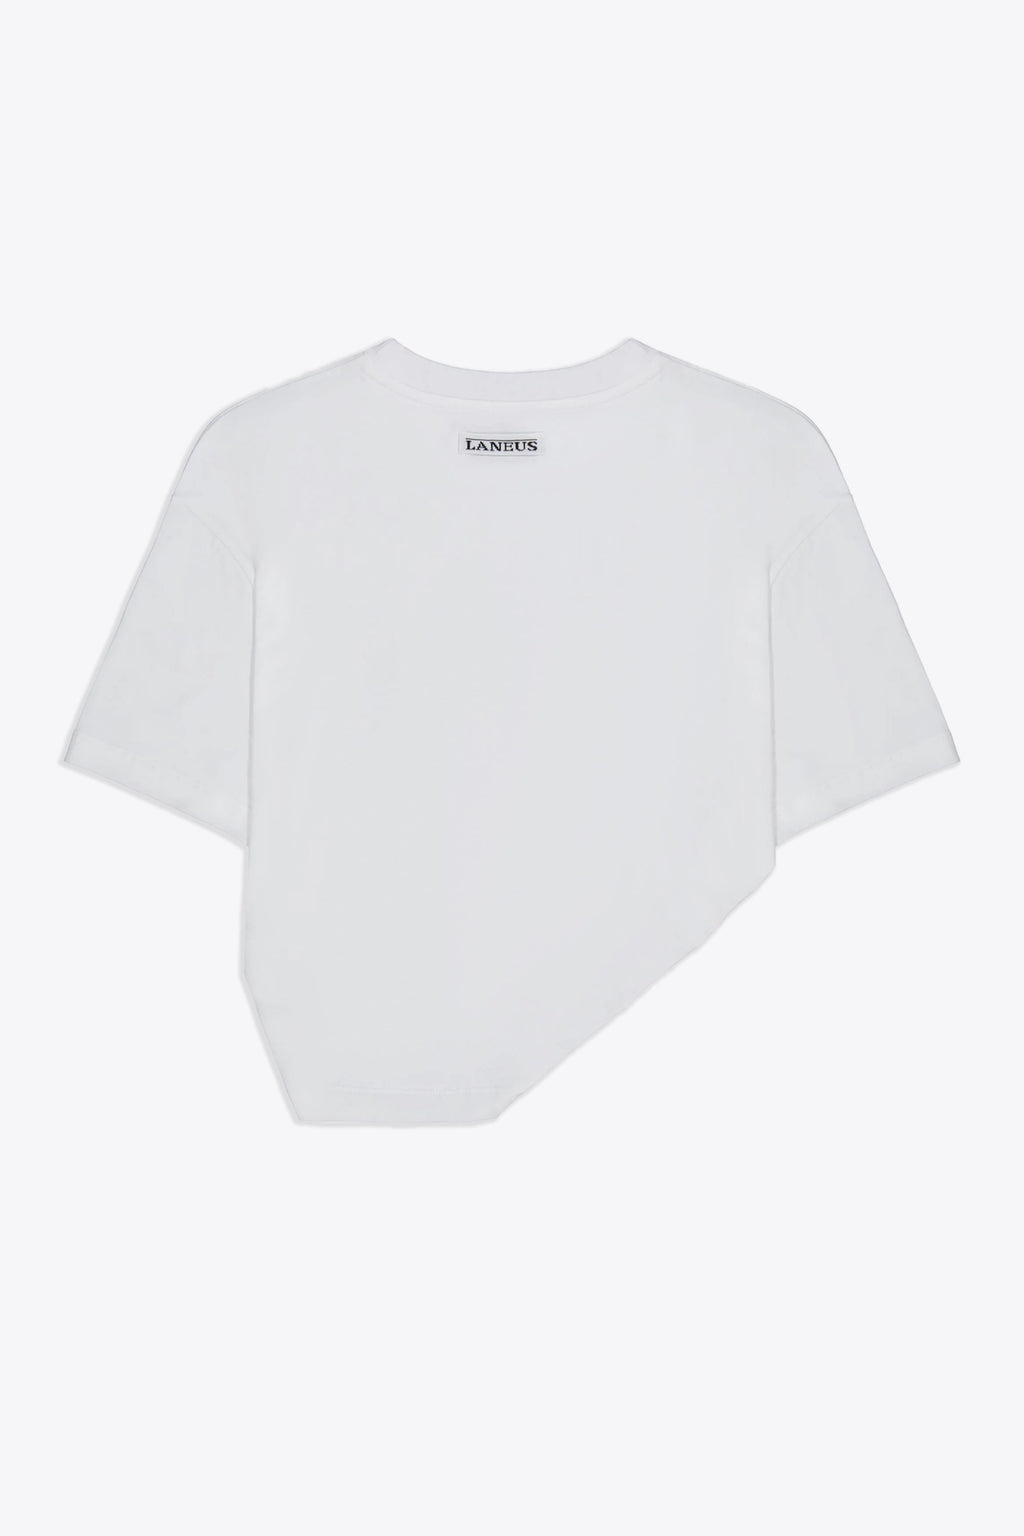 alt-image__White-cotton-cropped-t-shirt-with-drapery---Jersey-T-shirt